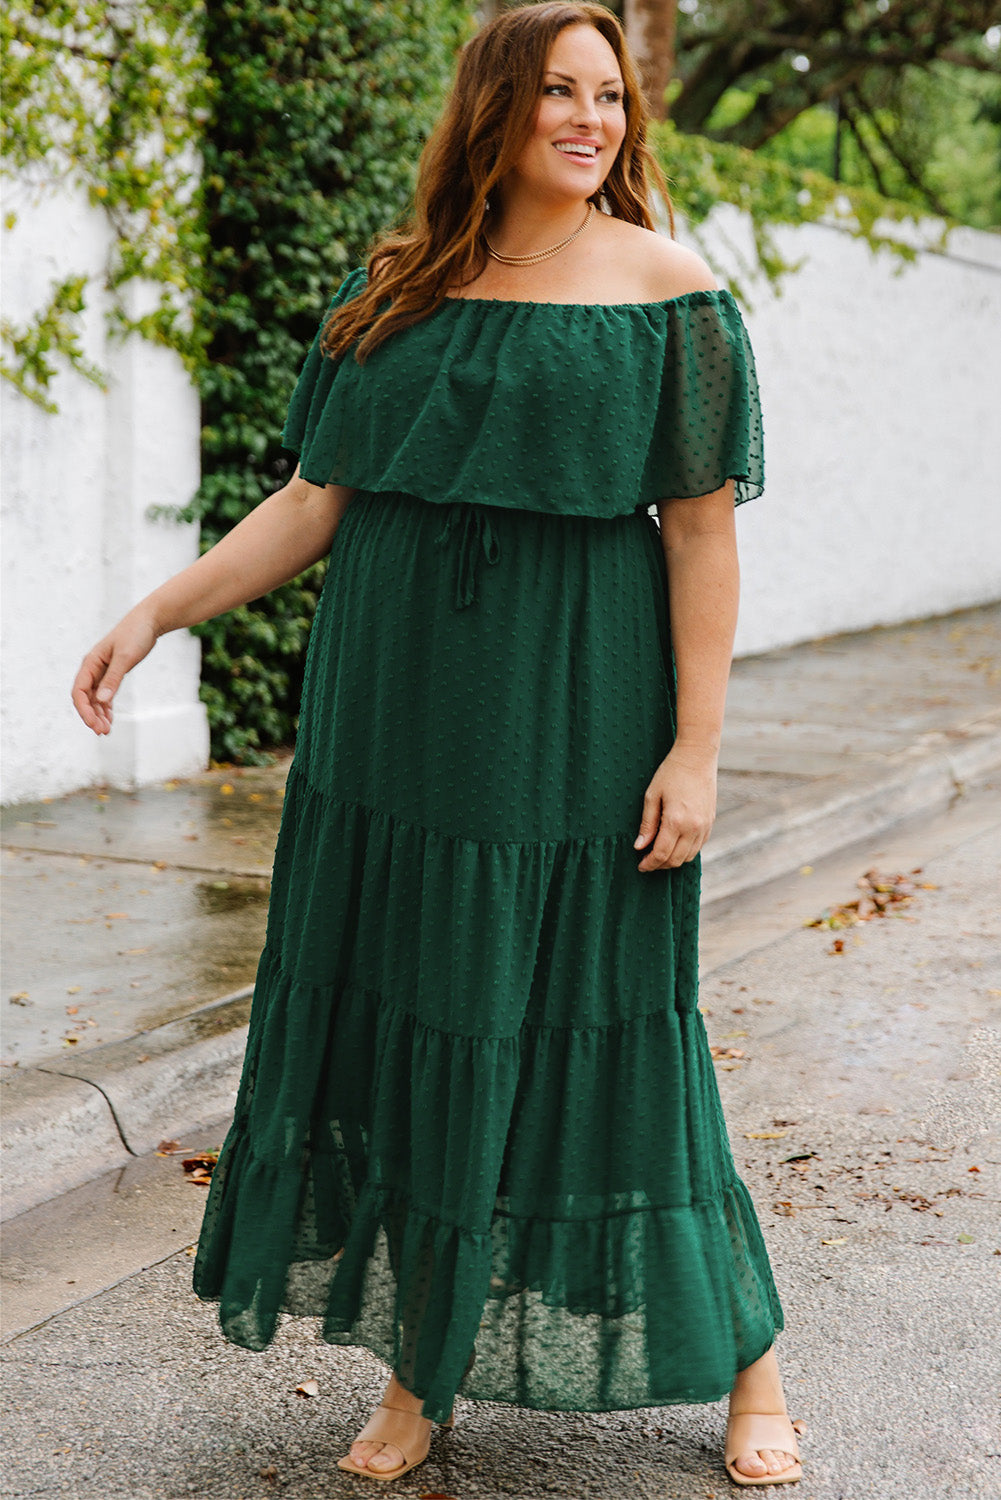 Swiss Dot Off-Shoulder Tiered Maxi Dress in Green and White - Plus Only